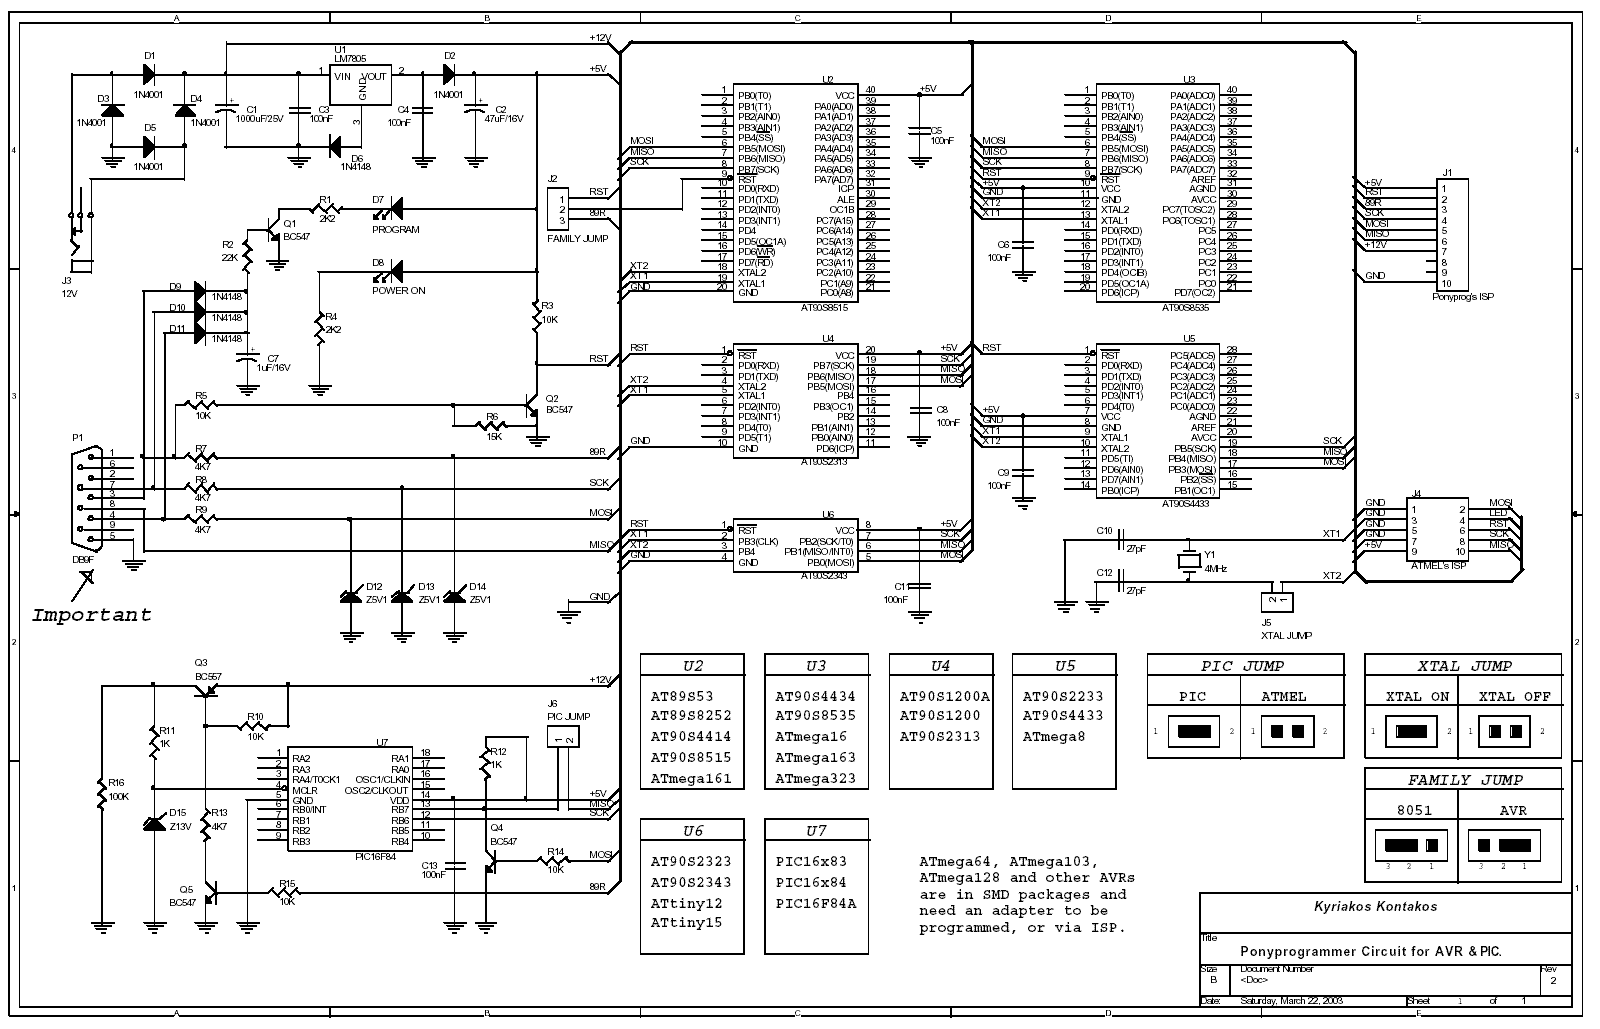 Ponyprog Circuit for AVR & PIC16F84 - Electronics-Lab automotive schematic diagrams 